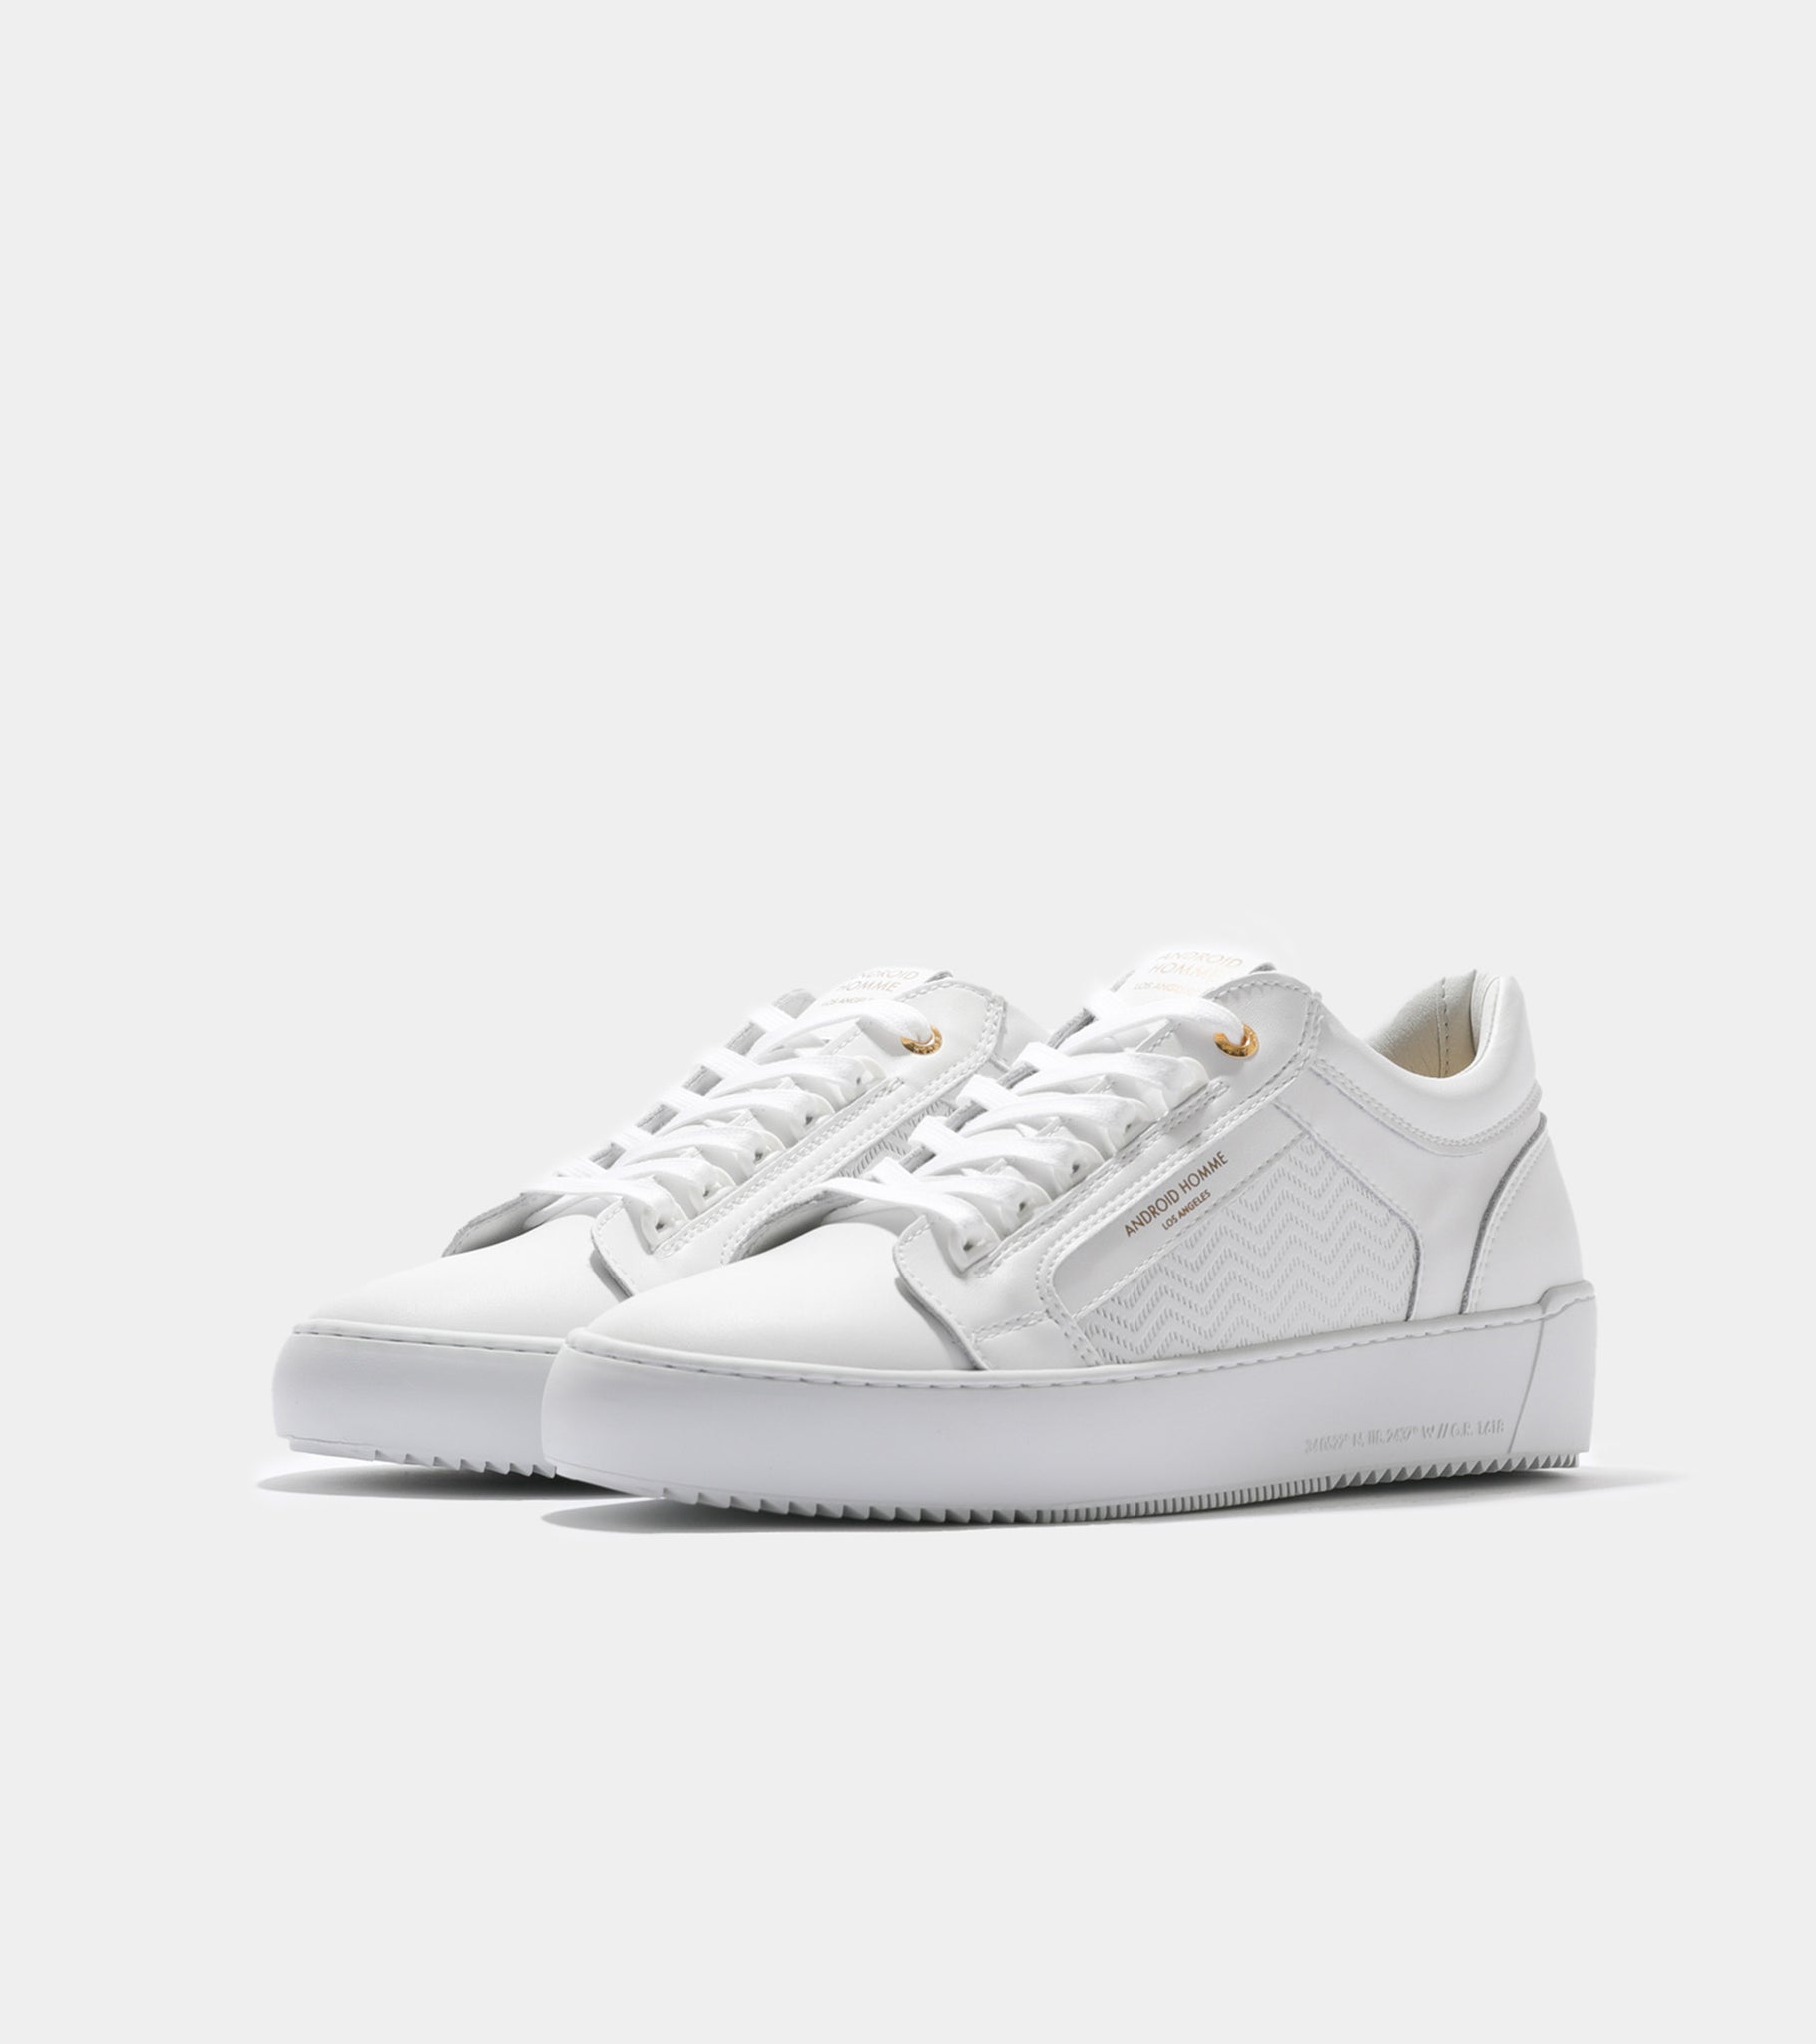 Ecom imagery of the Venice White Emboss Leather Android Homme Trainers.